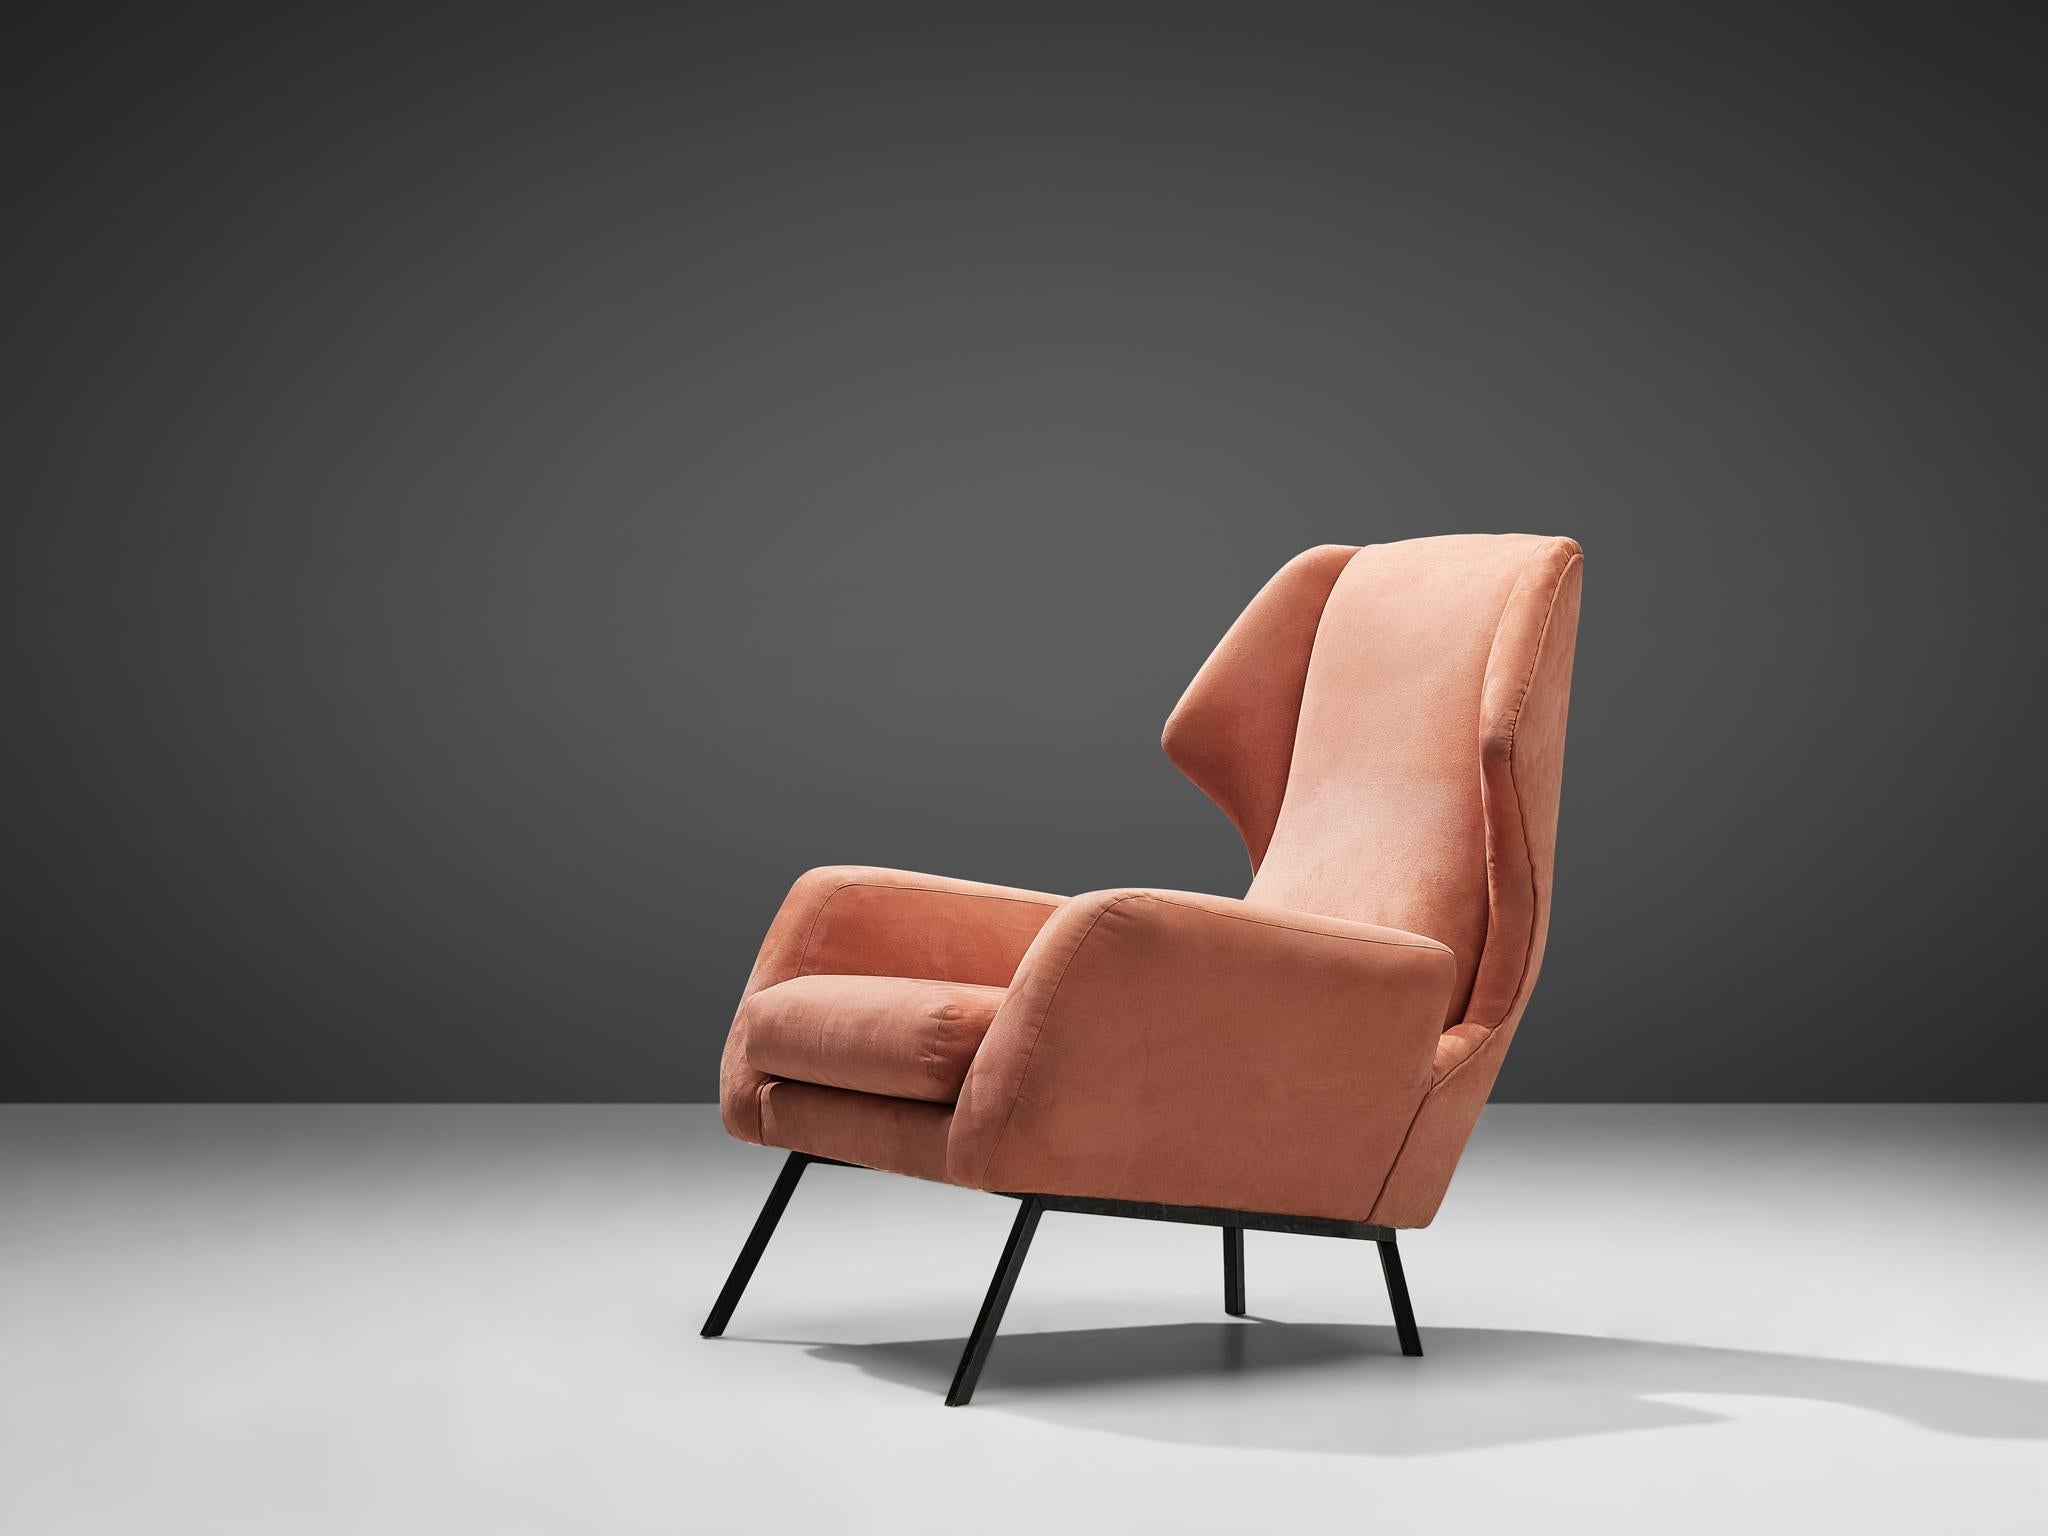 Italian Wingback Chair in Salmon Pink Upholstery